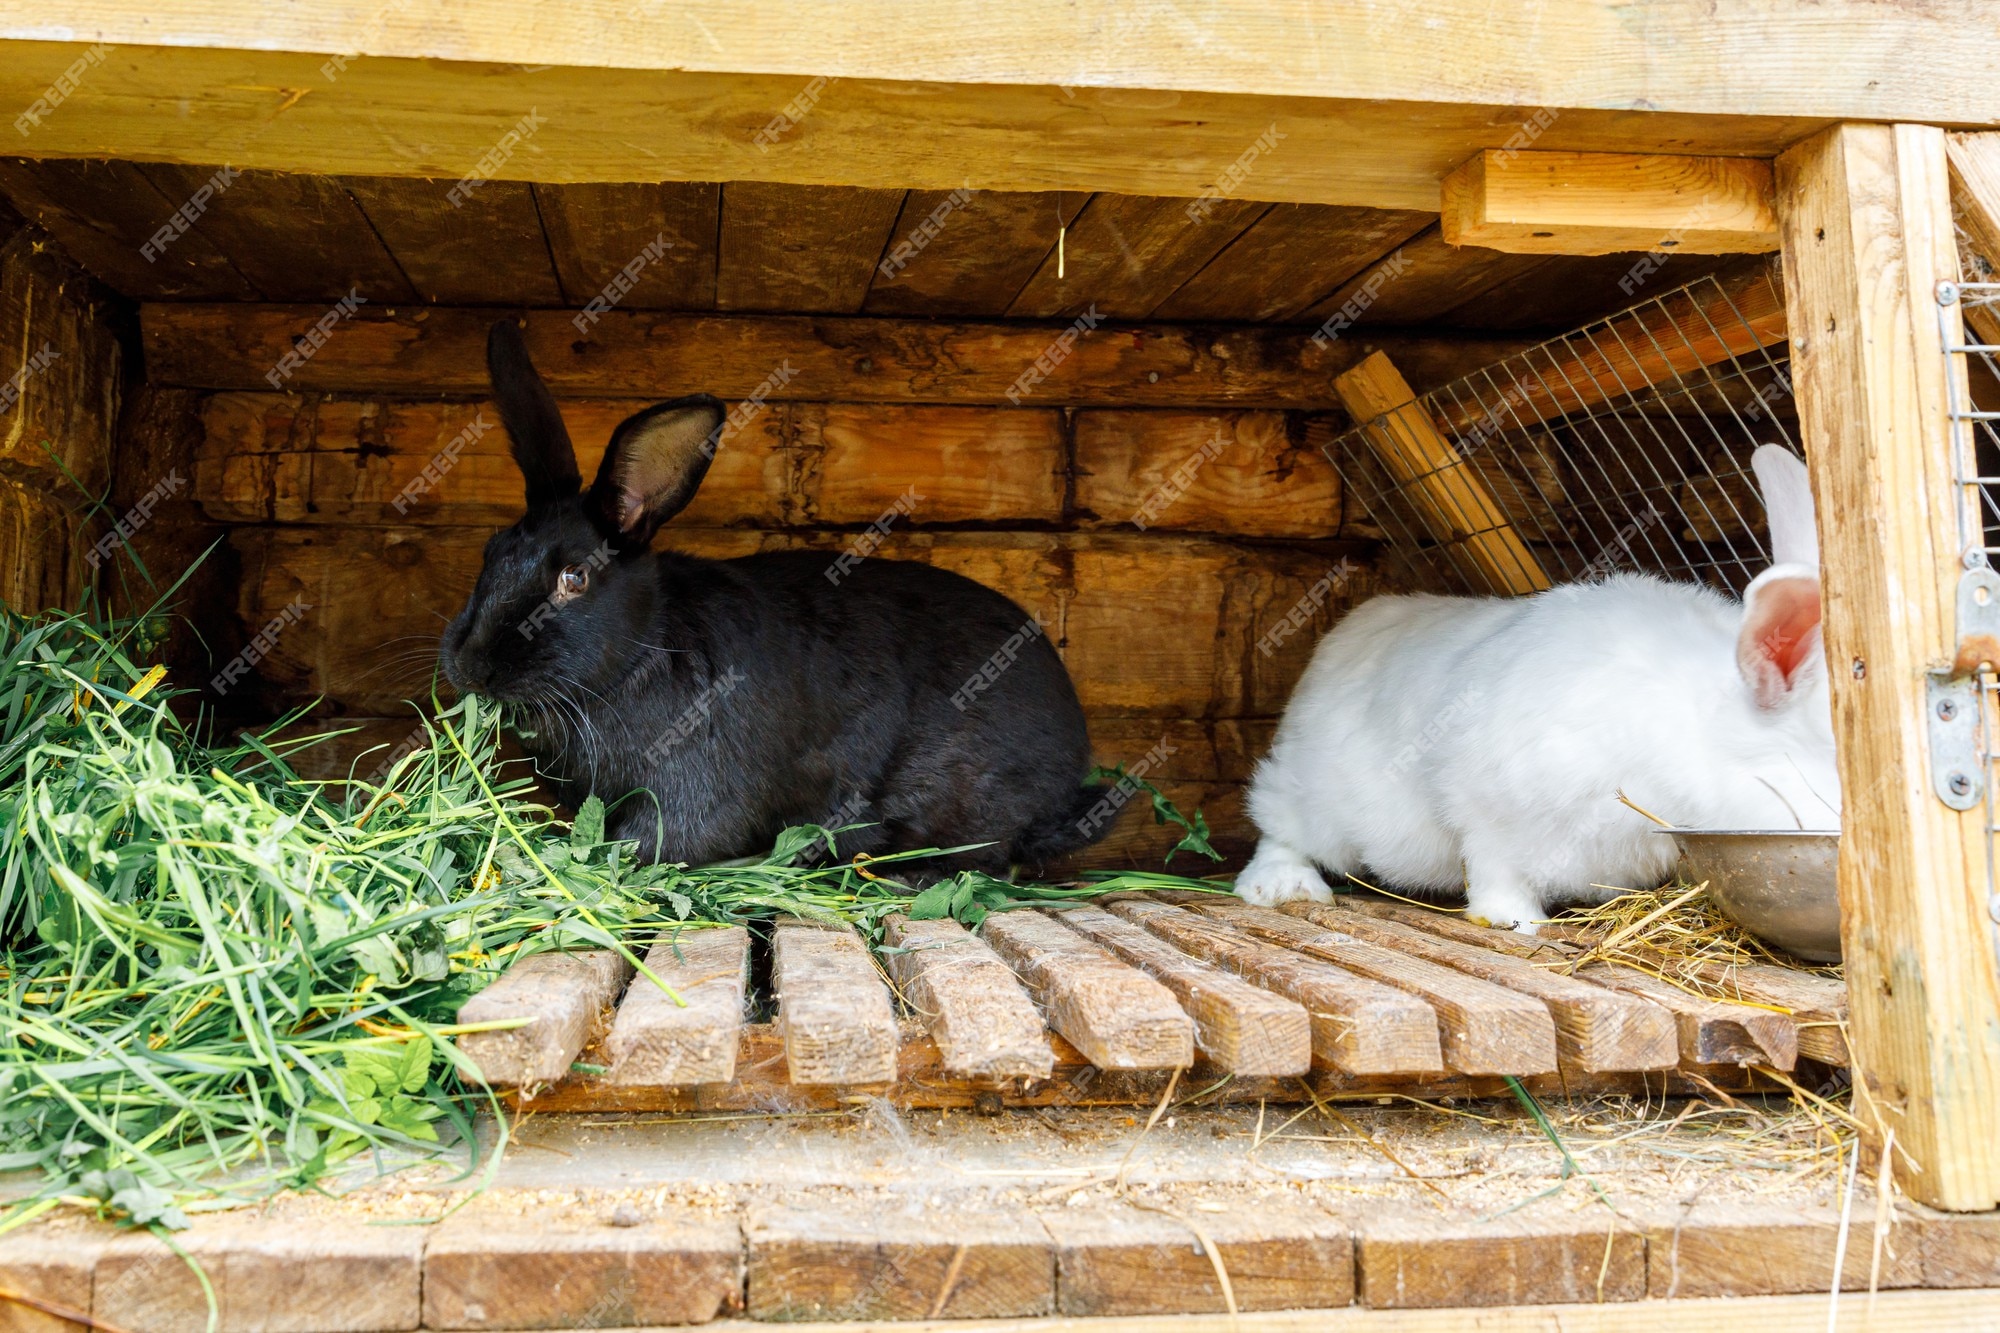 Premium Photo | Small feeding white and black rabbits chewing grass in  rabbit-hutch on animal farm, barn ranch background. bunny in hutch on  natural eco farm. modern animal livestock and ecological farming